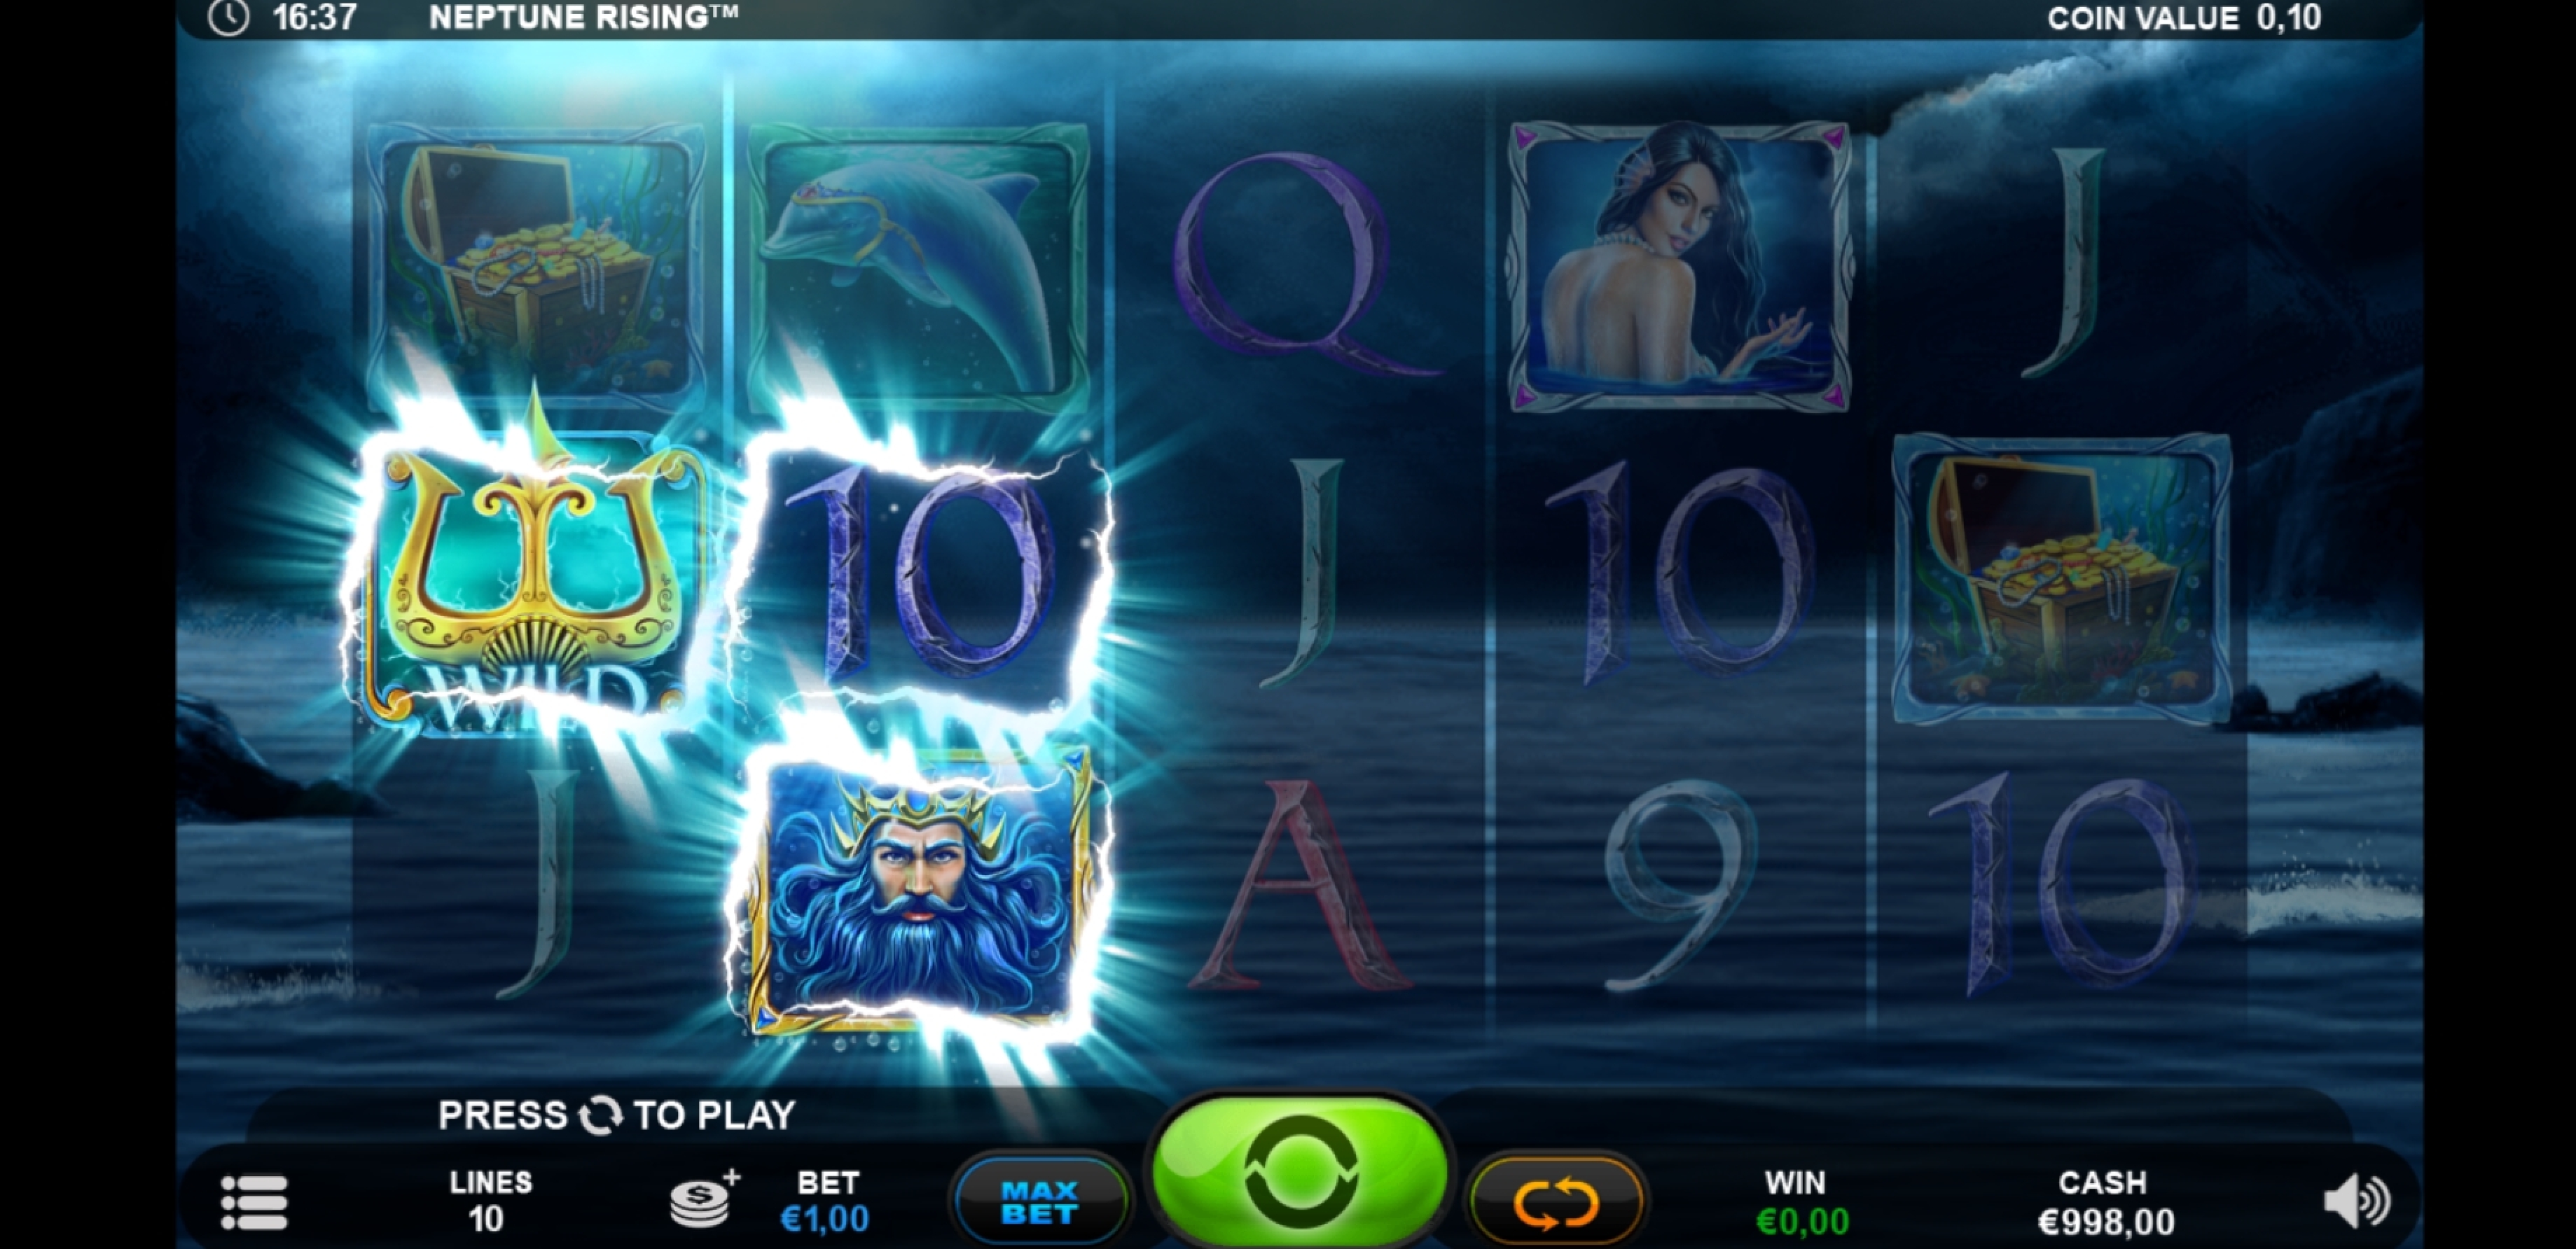 Win Money in Neptune Rising Free Slot Game by Plank Gaming